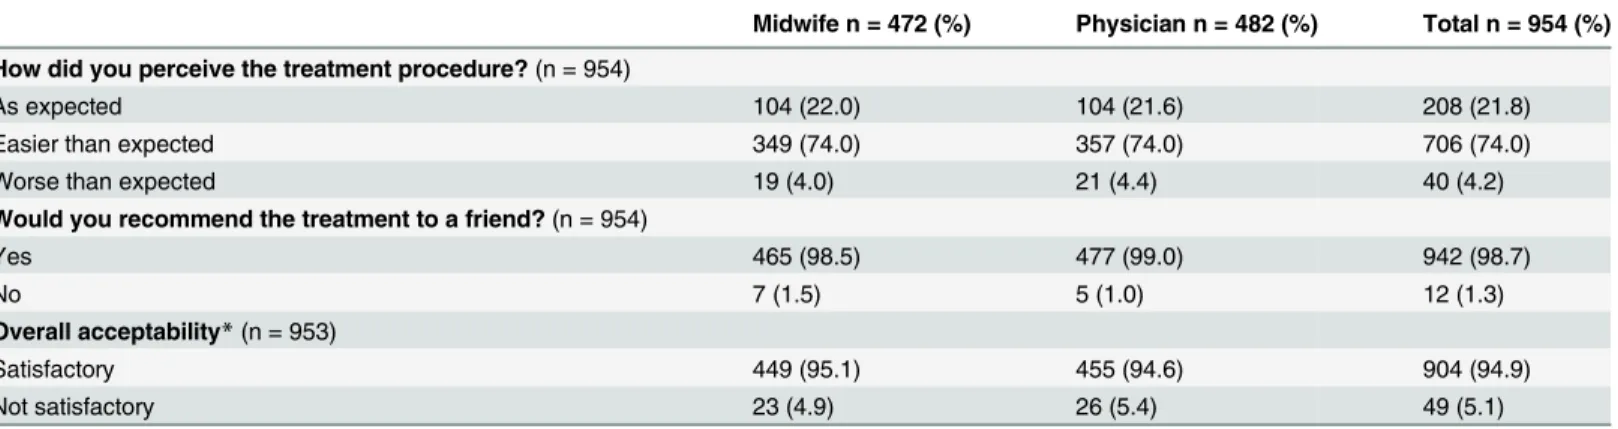 Table 1. Women´s acceptability of misoprostol treatment for incomplete abortion by provider.